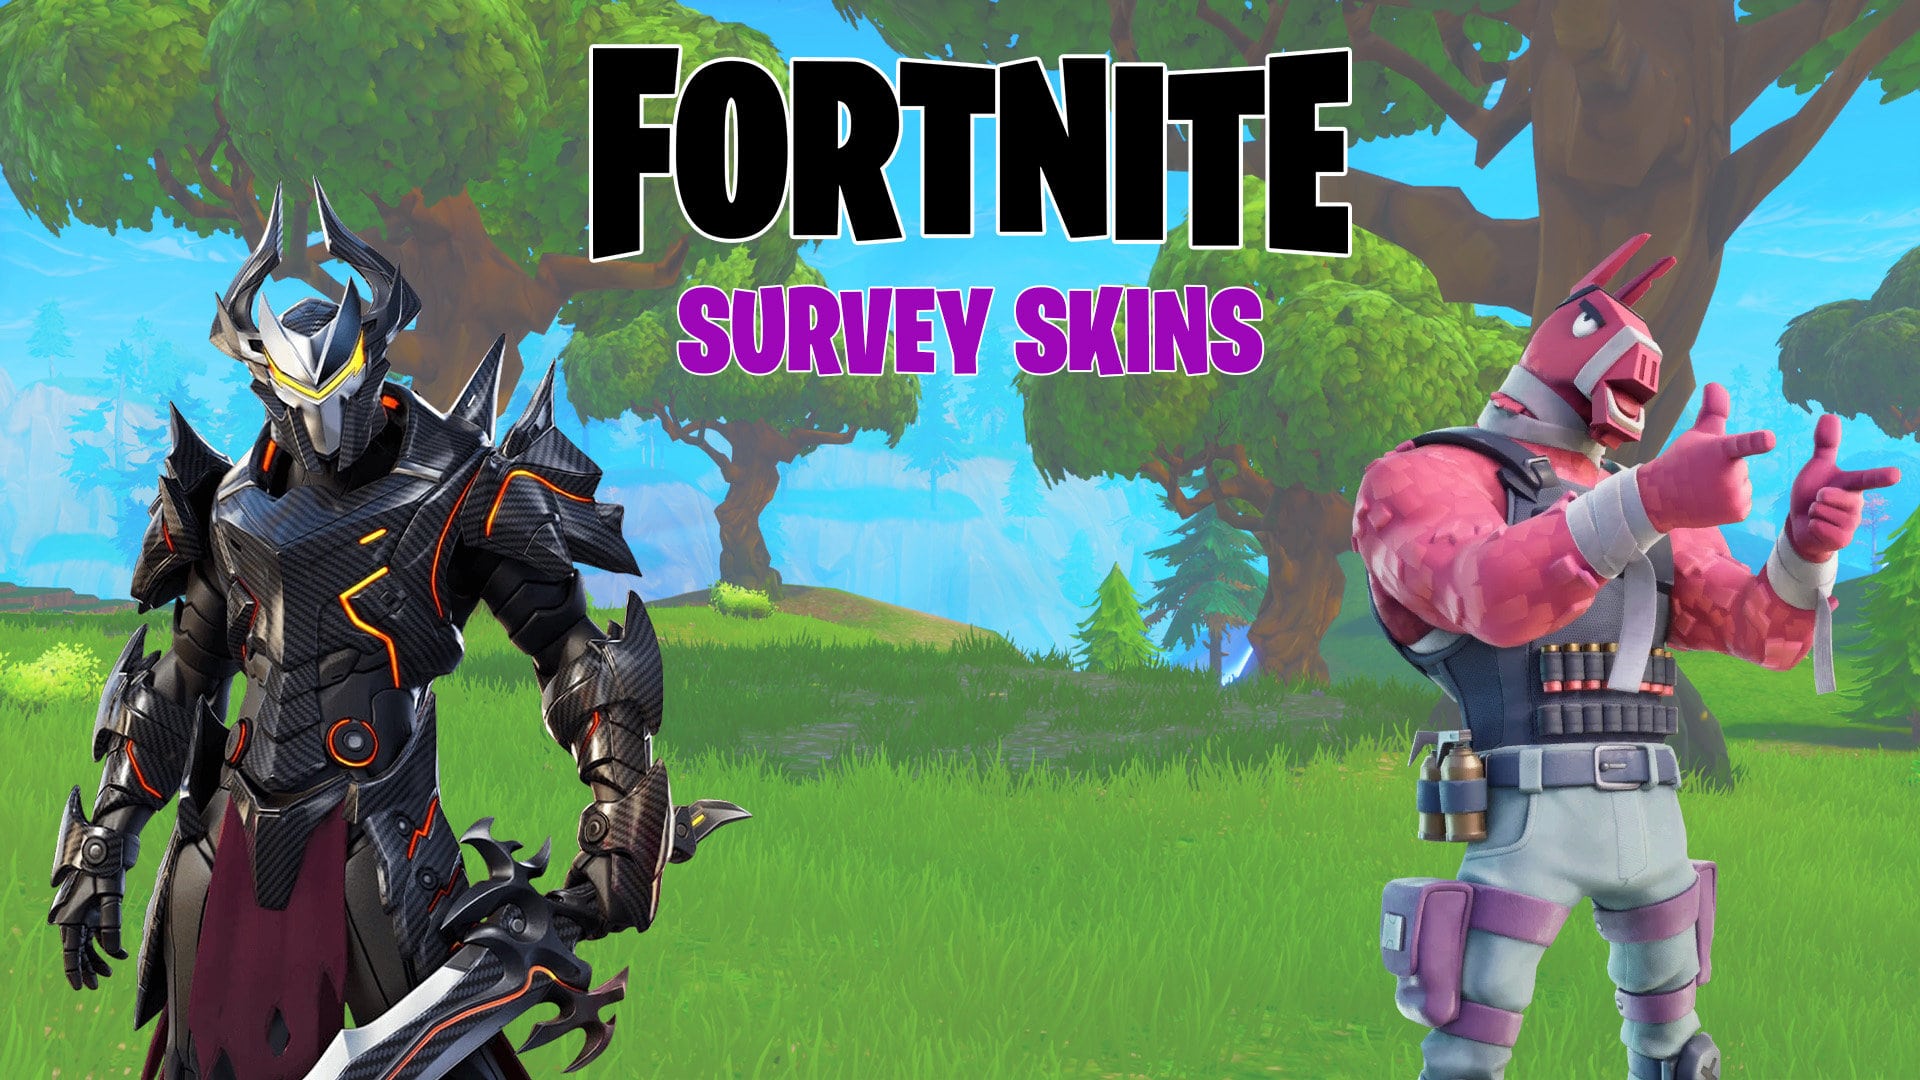 Top fortnite survey skins ranked from worst to best